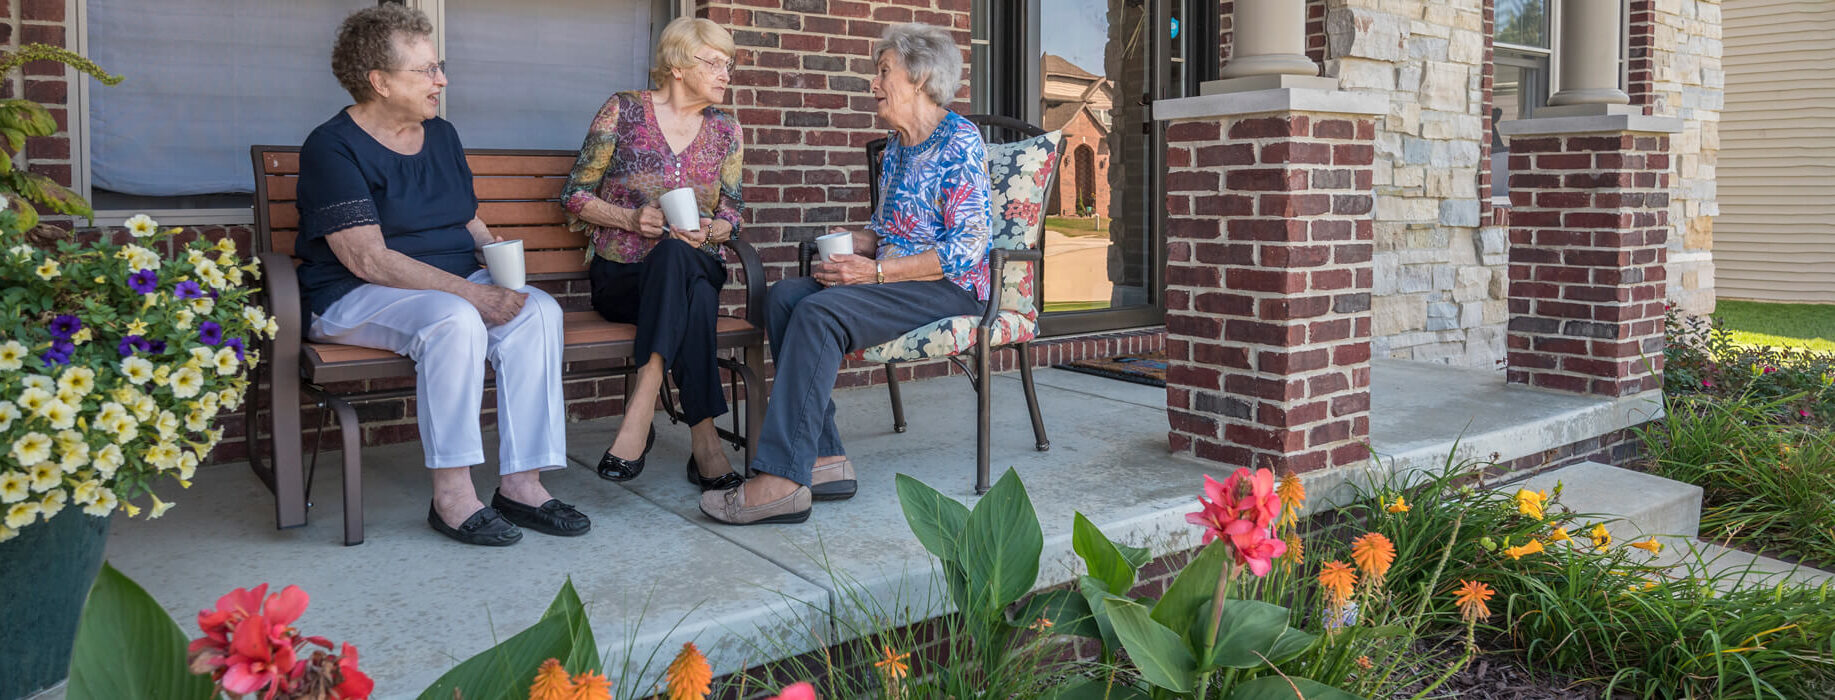 residents socializing on porch